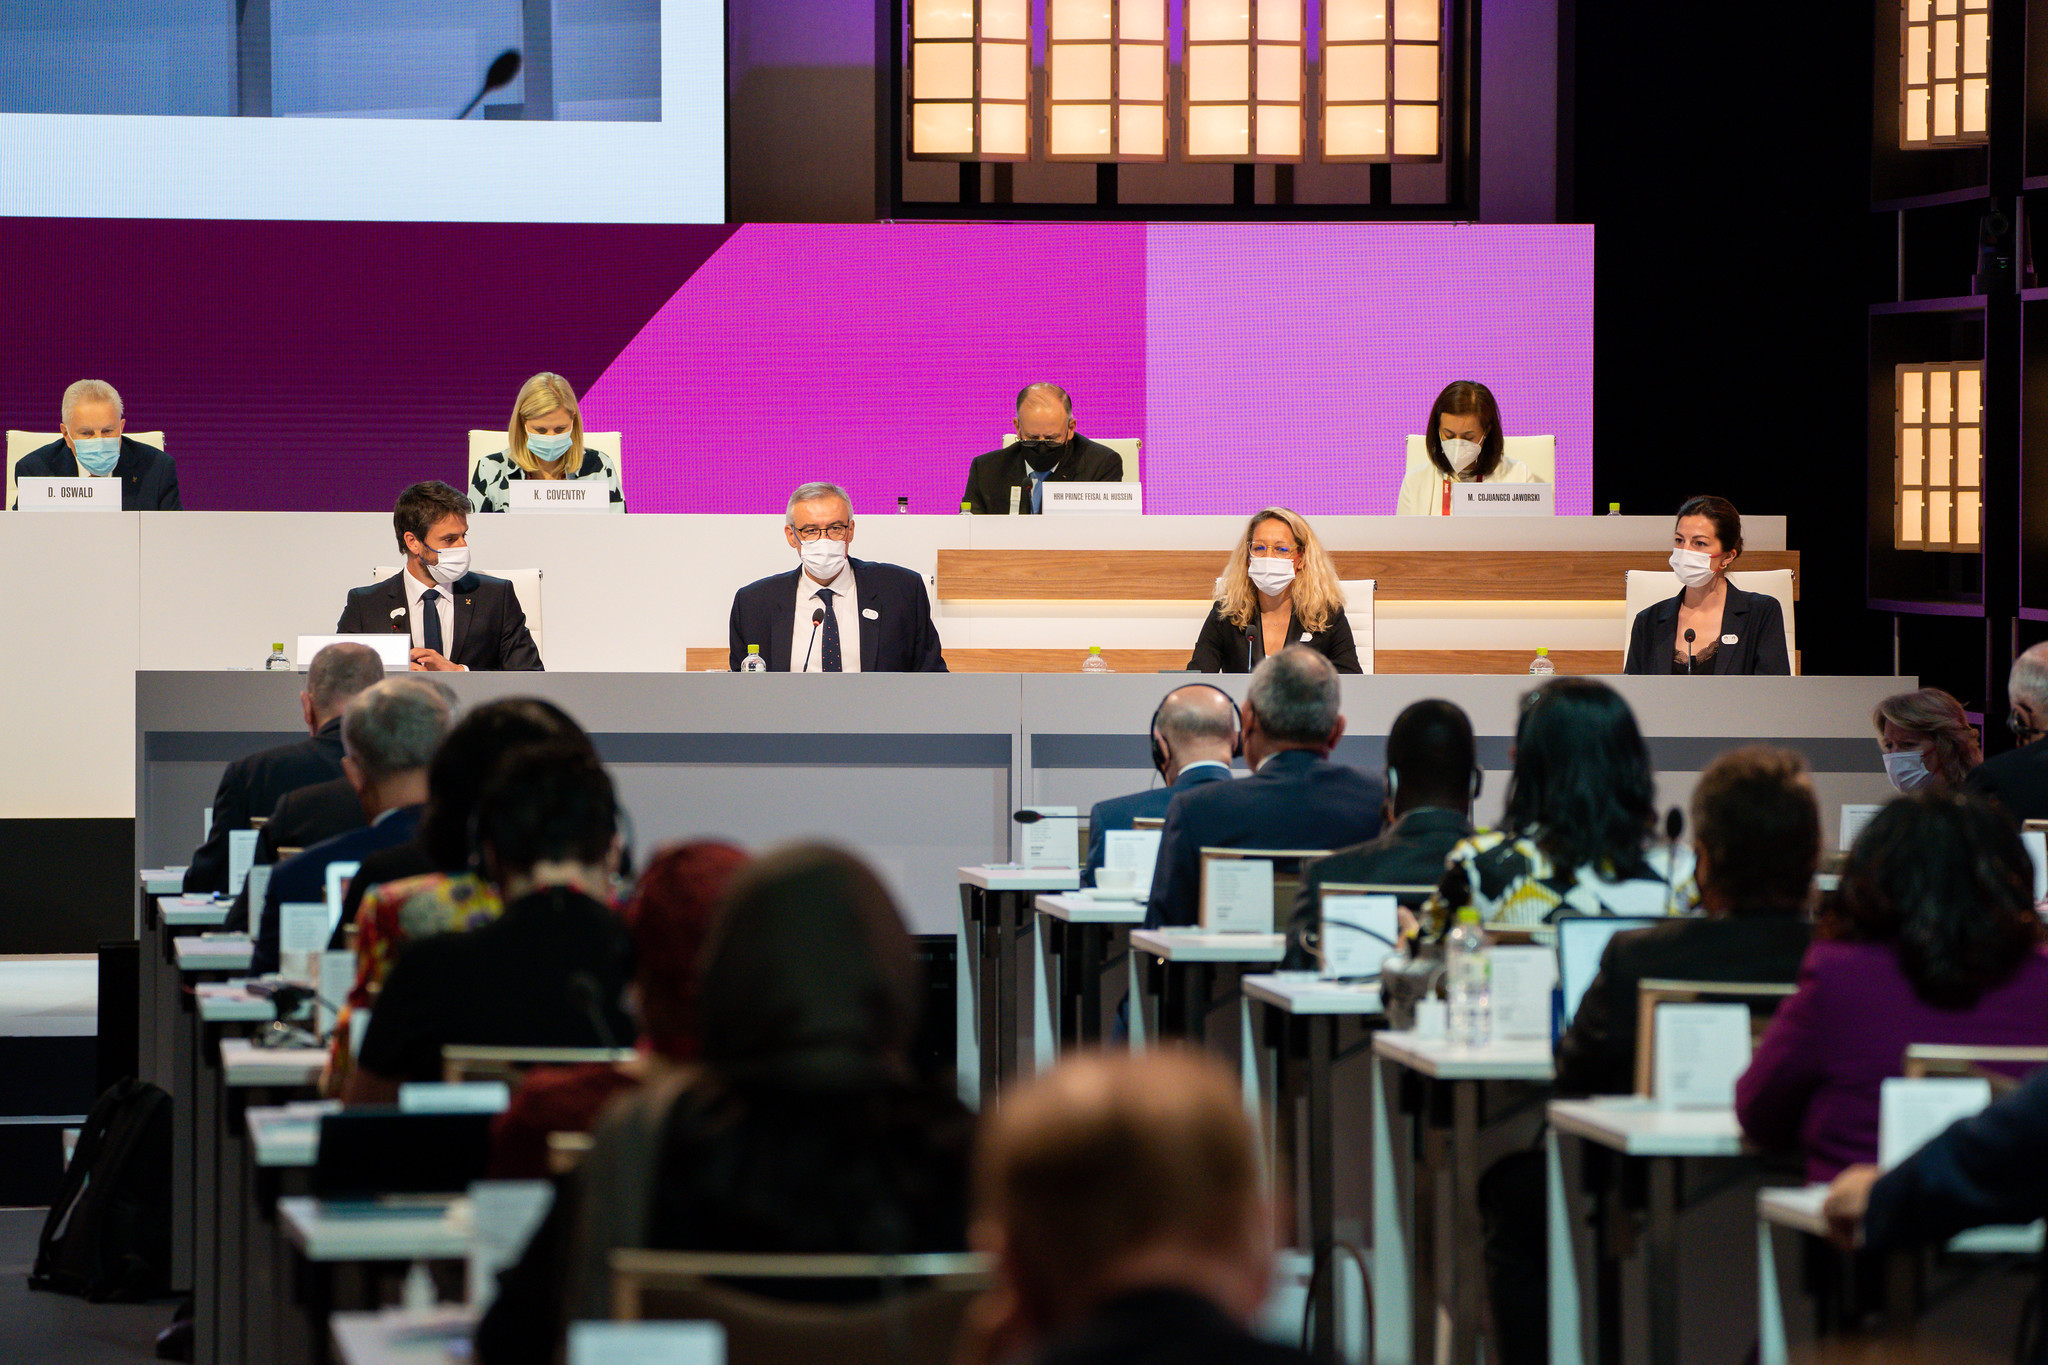 Paris 2024 provided an update on their progress as the handover from Tokyo 2020 approaches ©IOC